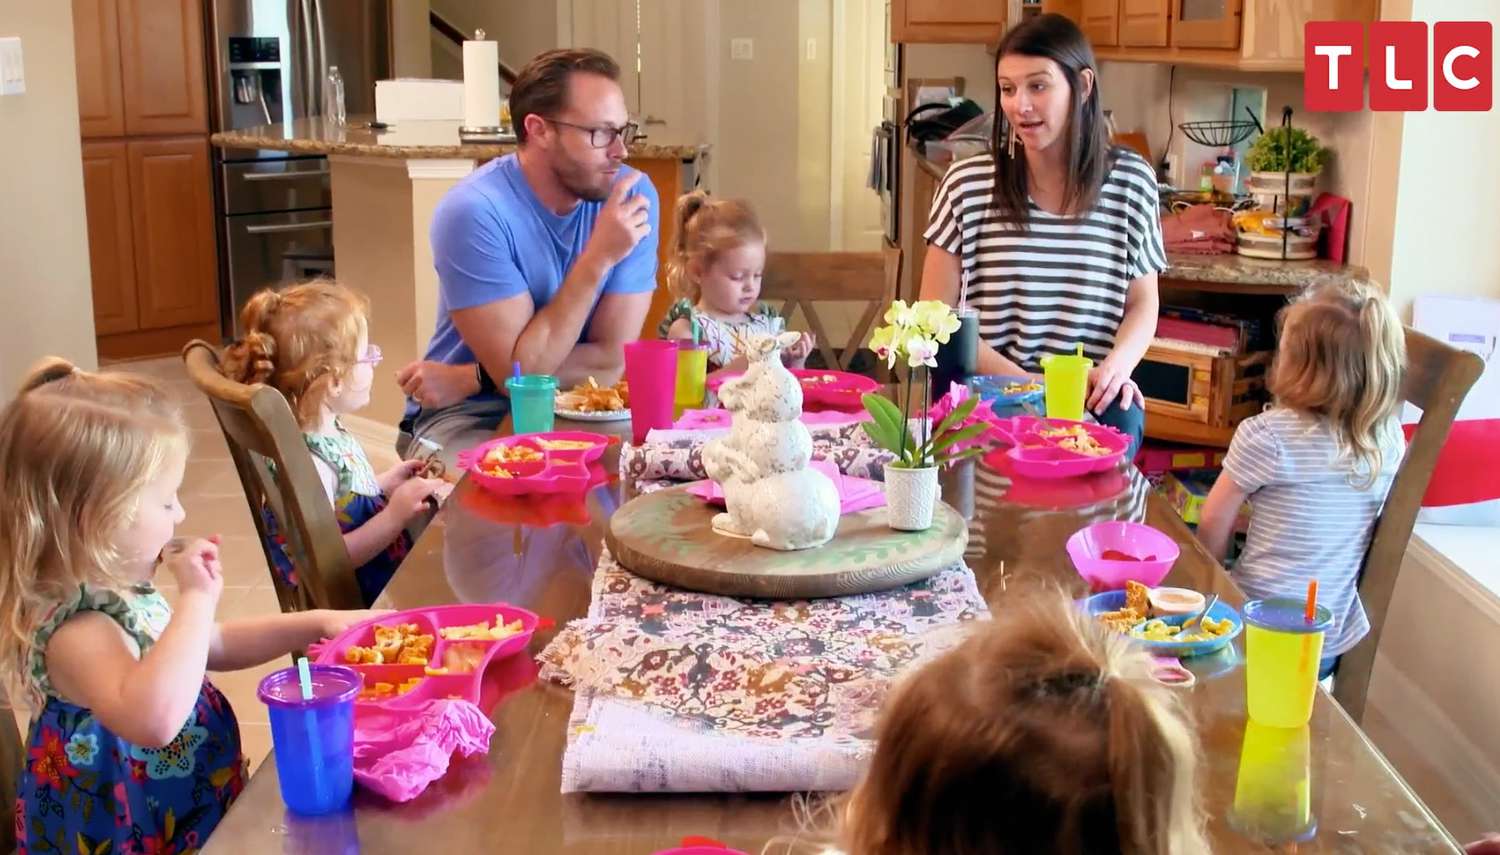 OutDaughtered Is Back! Adam and Danielle Busby Attempt to Potty Train Their 4-Year-Old Quintuplets